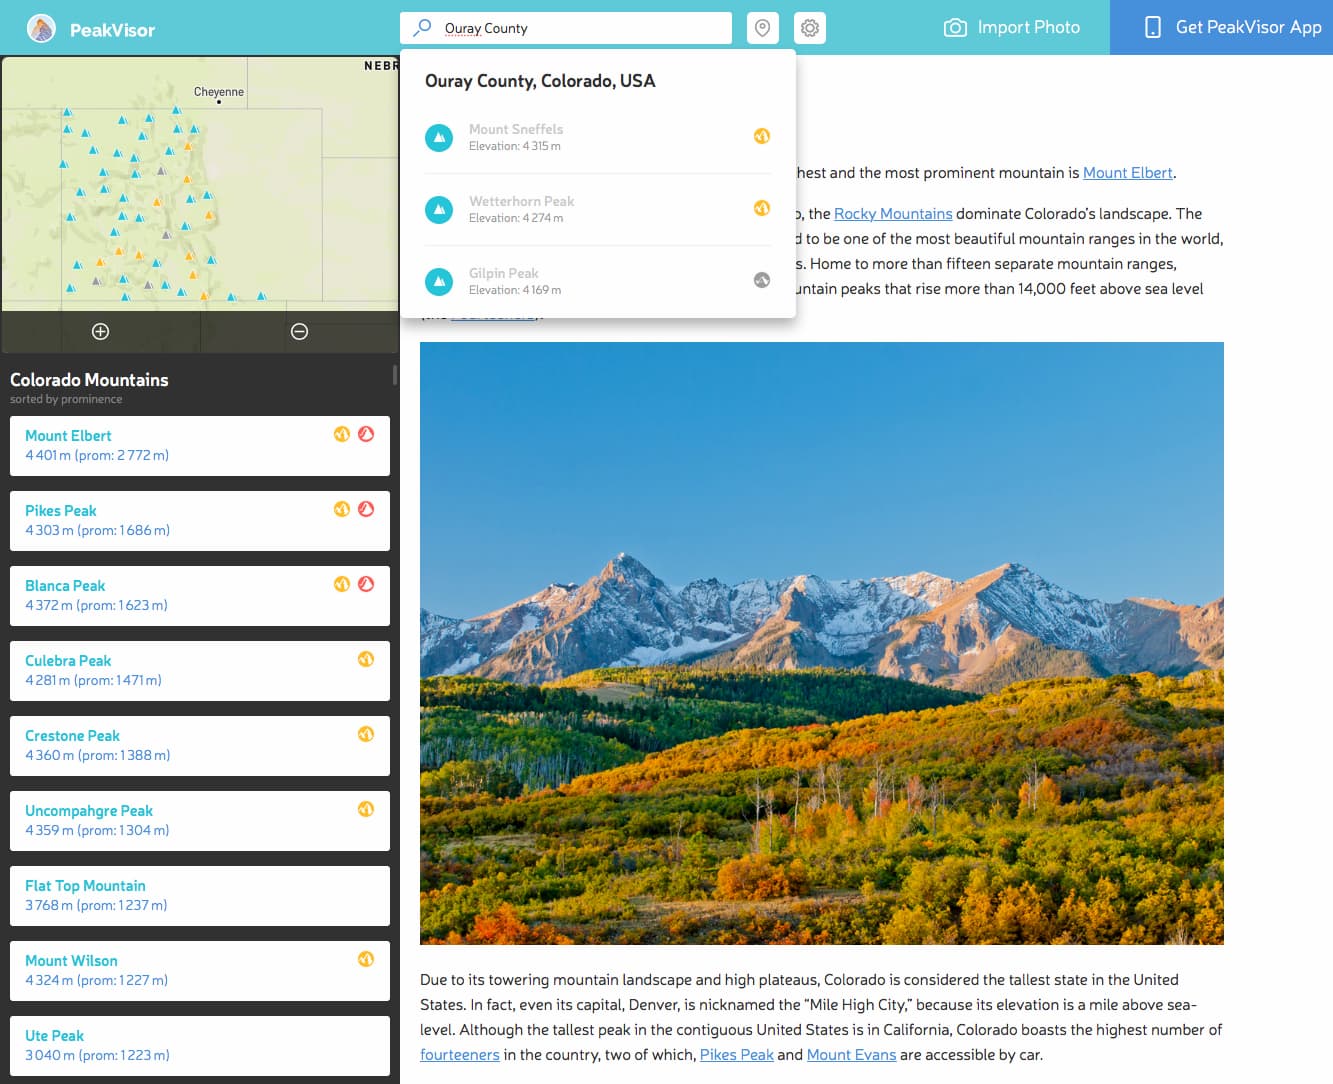 Screenshots: Searching for Ouray County in Colorado